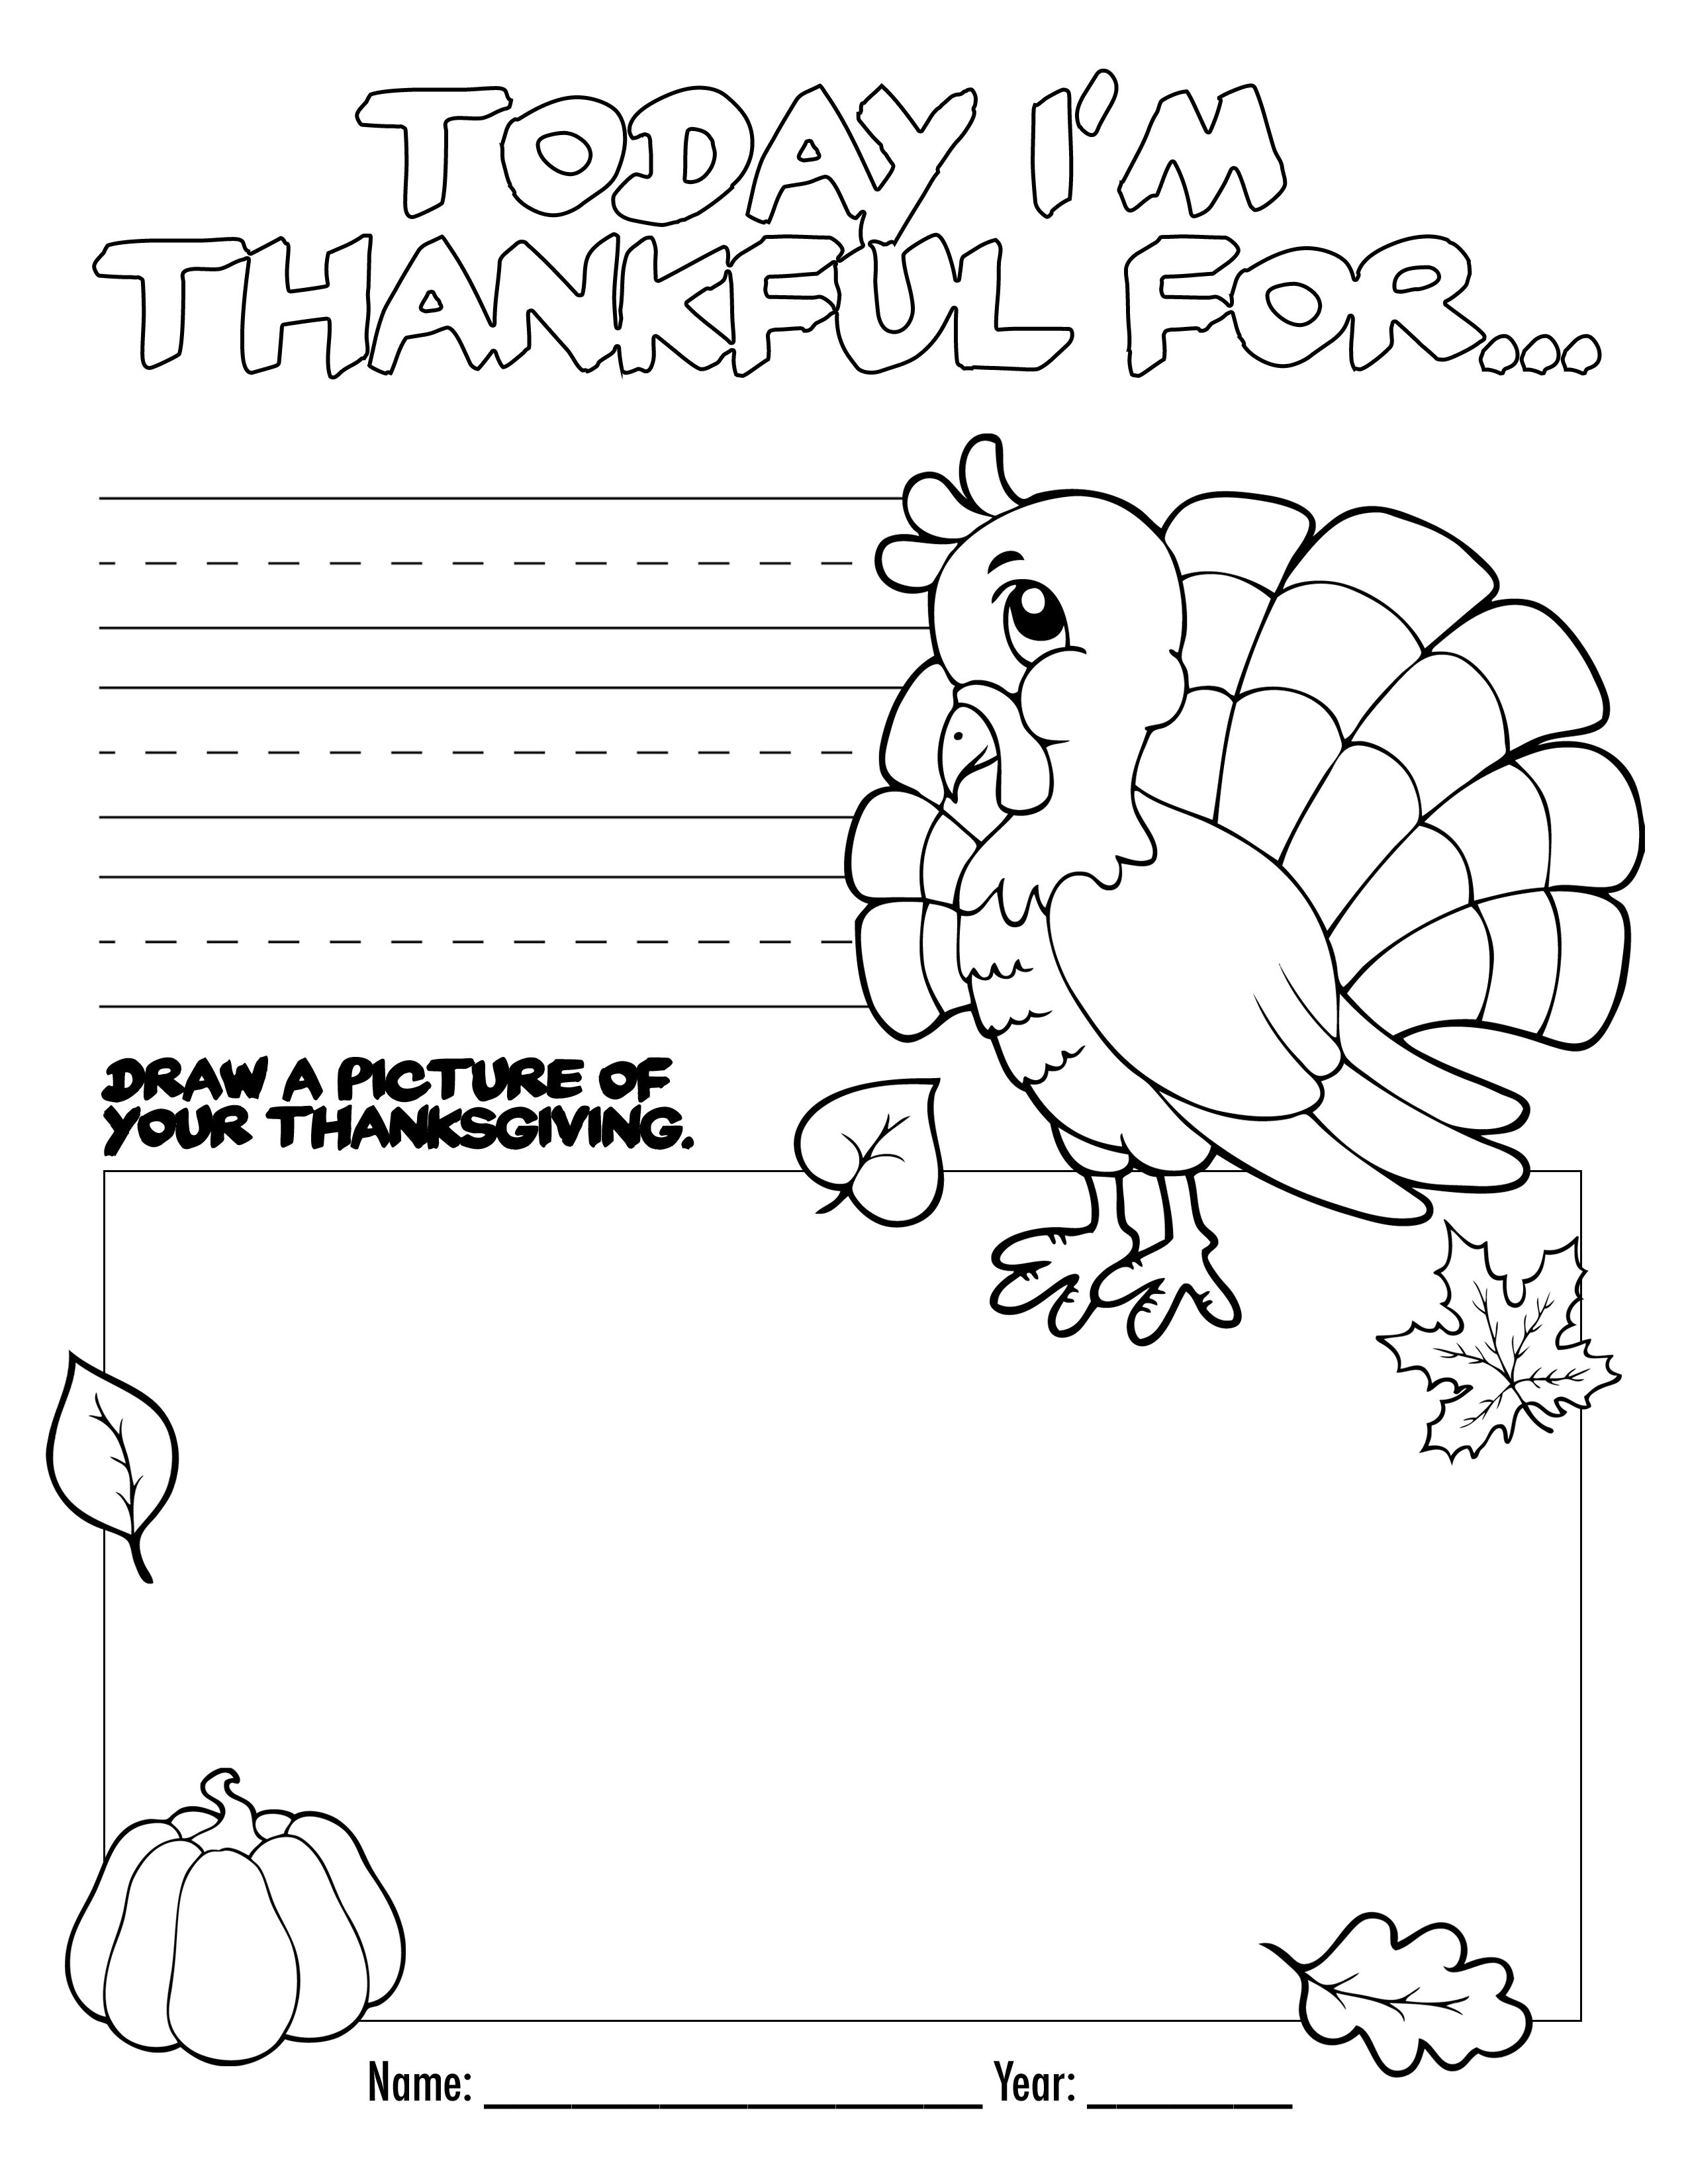 Thanksgiving Coloring Book Free Printable For The Kids! | Bloggers - Thanksgiving Printable Books Free